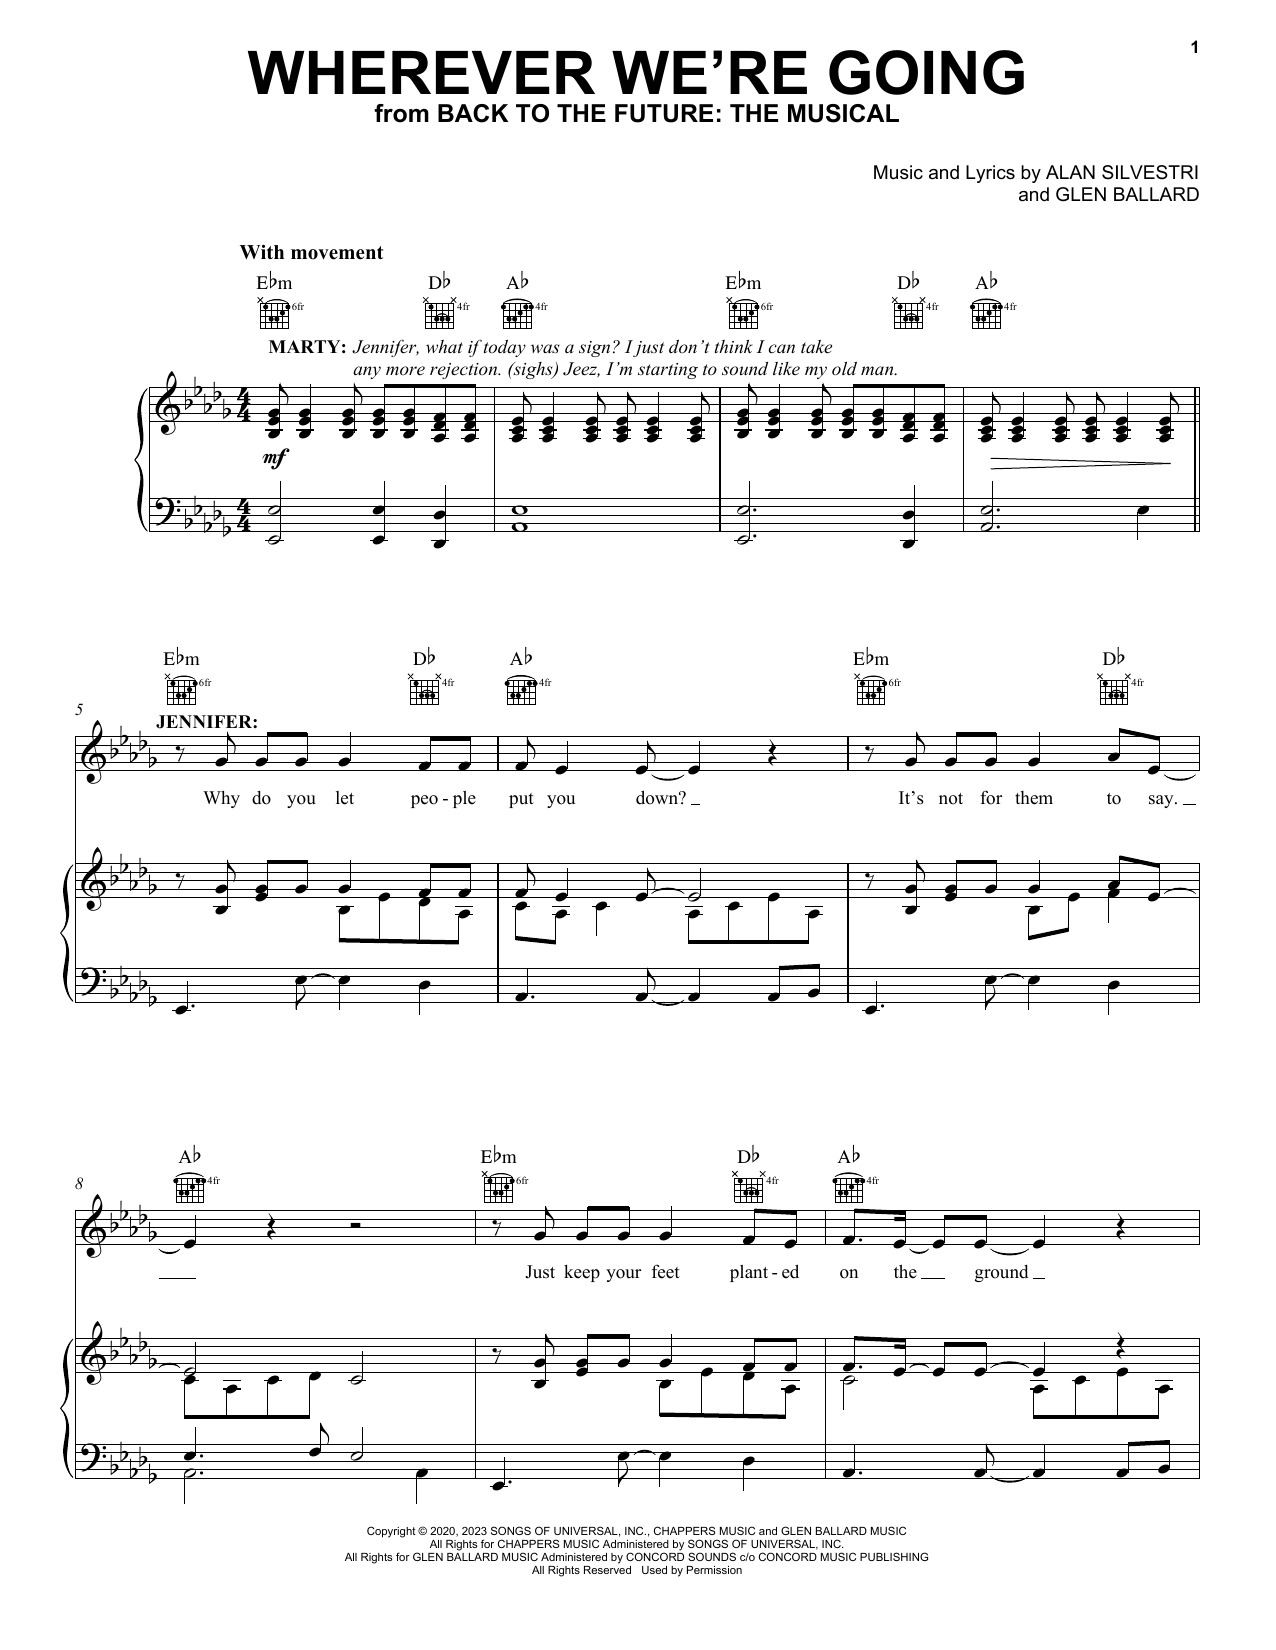 Download Glen Ballard and Alan Silvestri Wherever We're Going (from Back To The Sheet Music